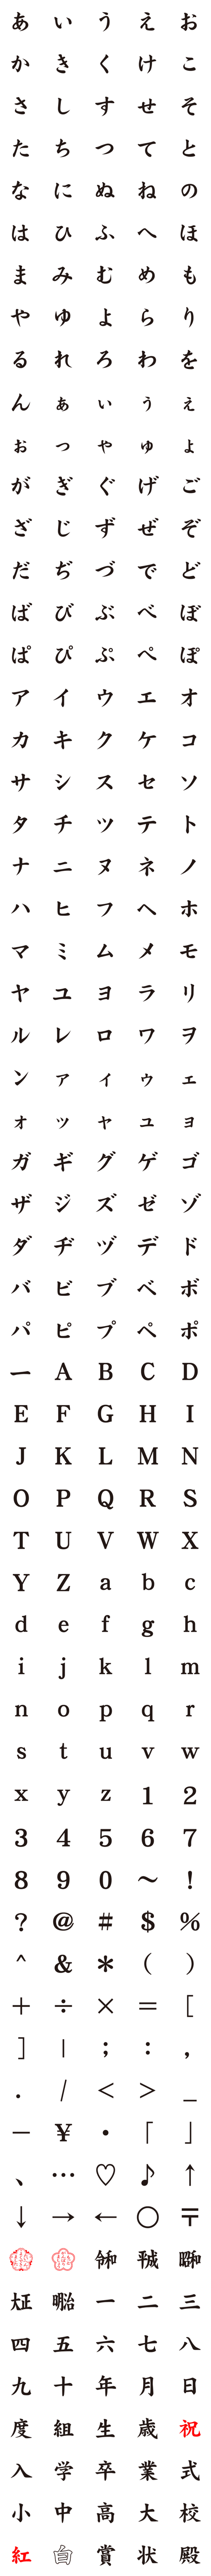 [LINE絵文字]DF太楷書体 令和版 フォント絵文字の画像一覧